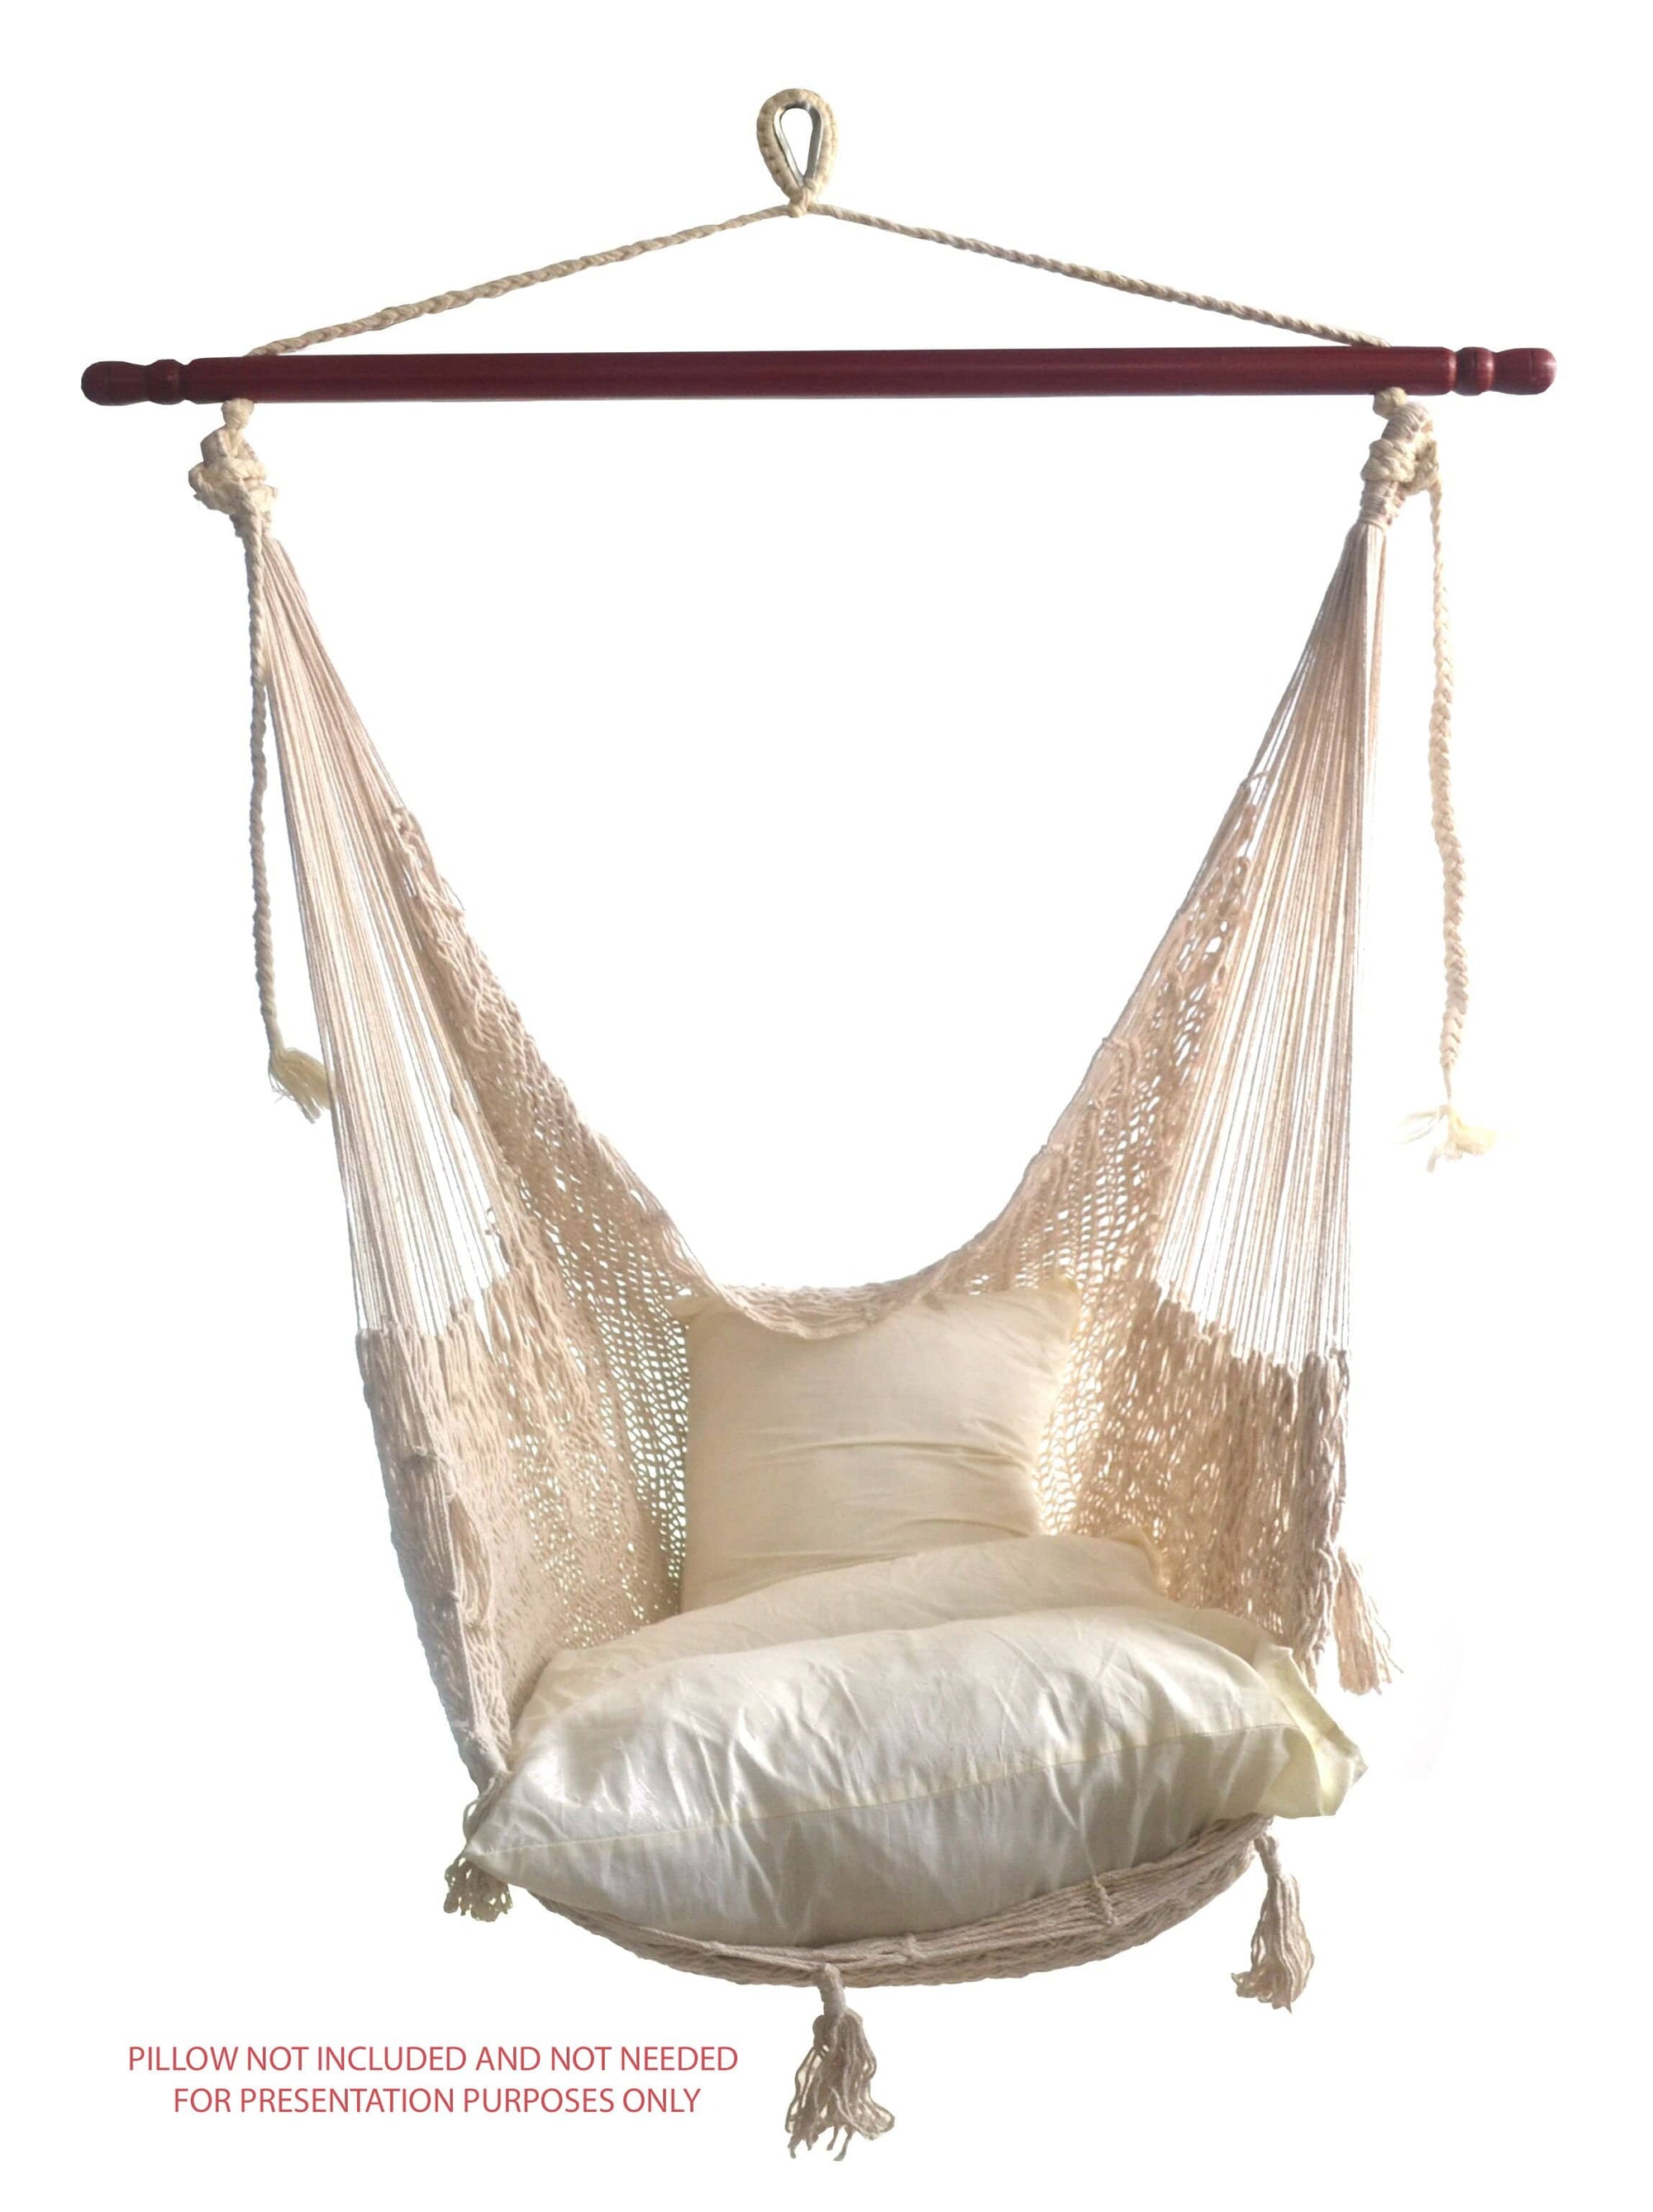 Hammock Universe Canada Deluxe Mayan Hammock Chair with Universal Chair Stand